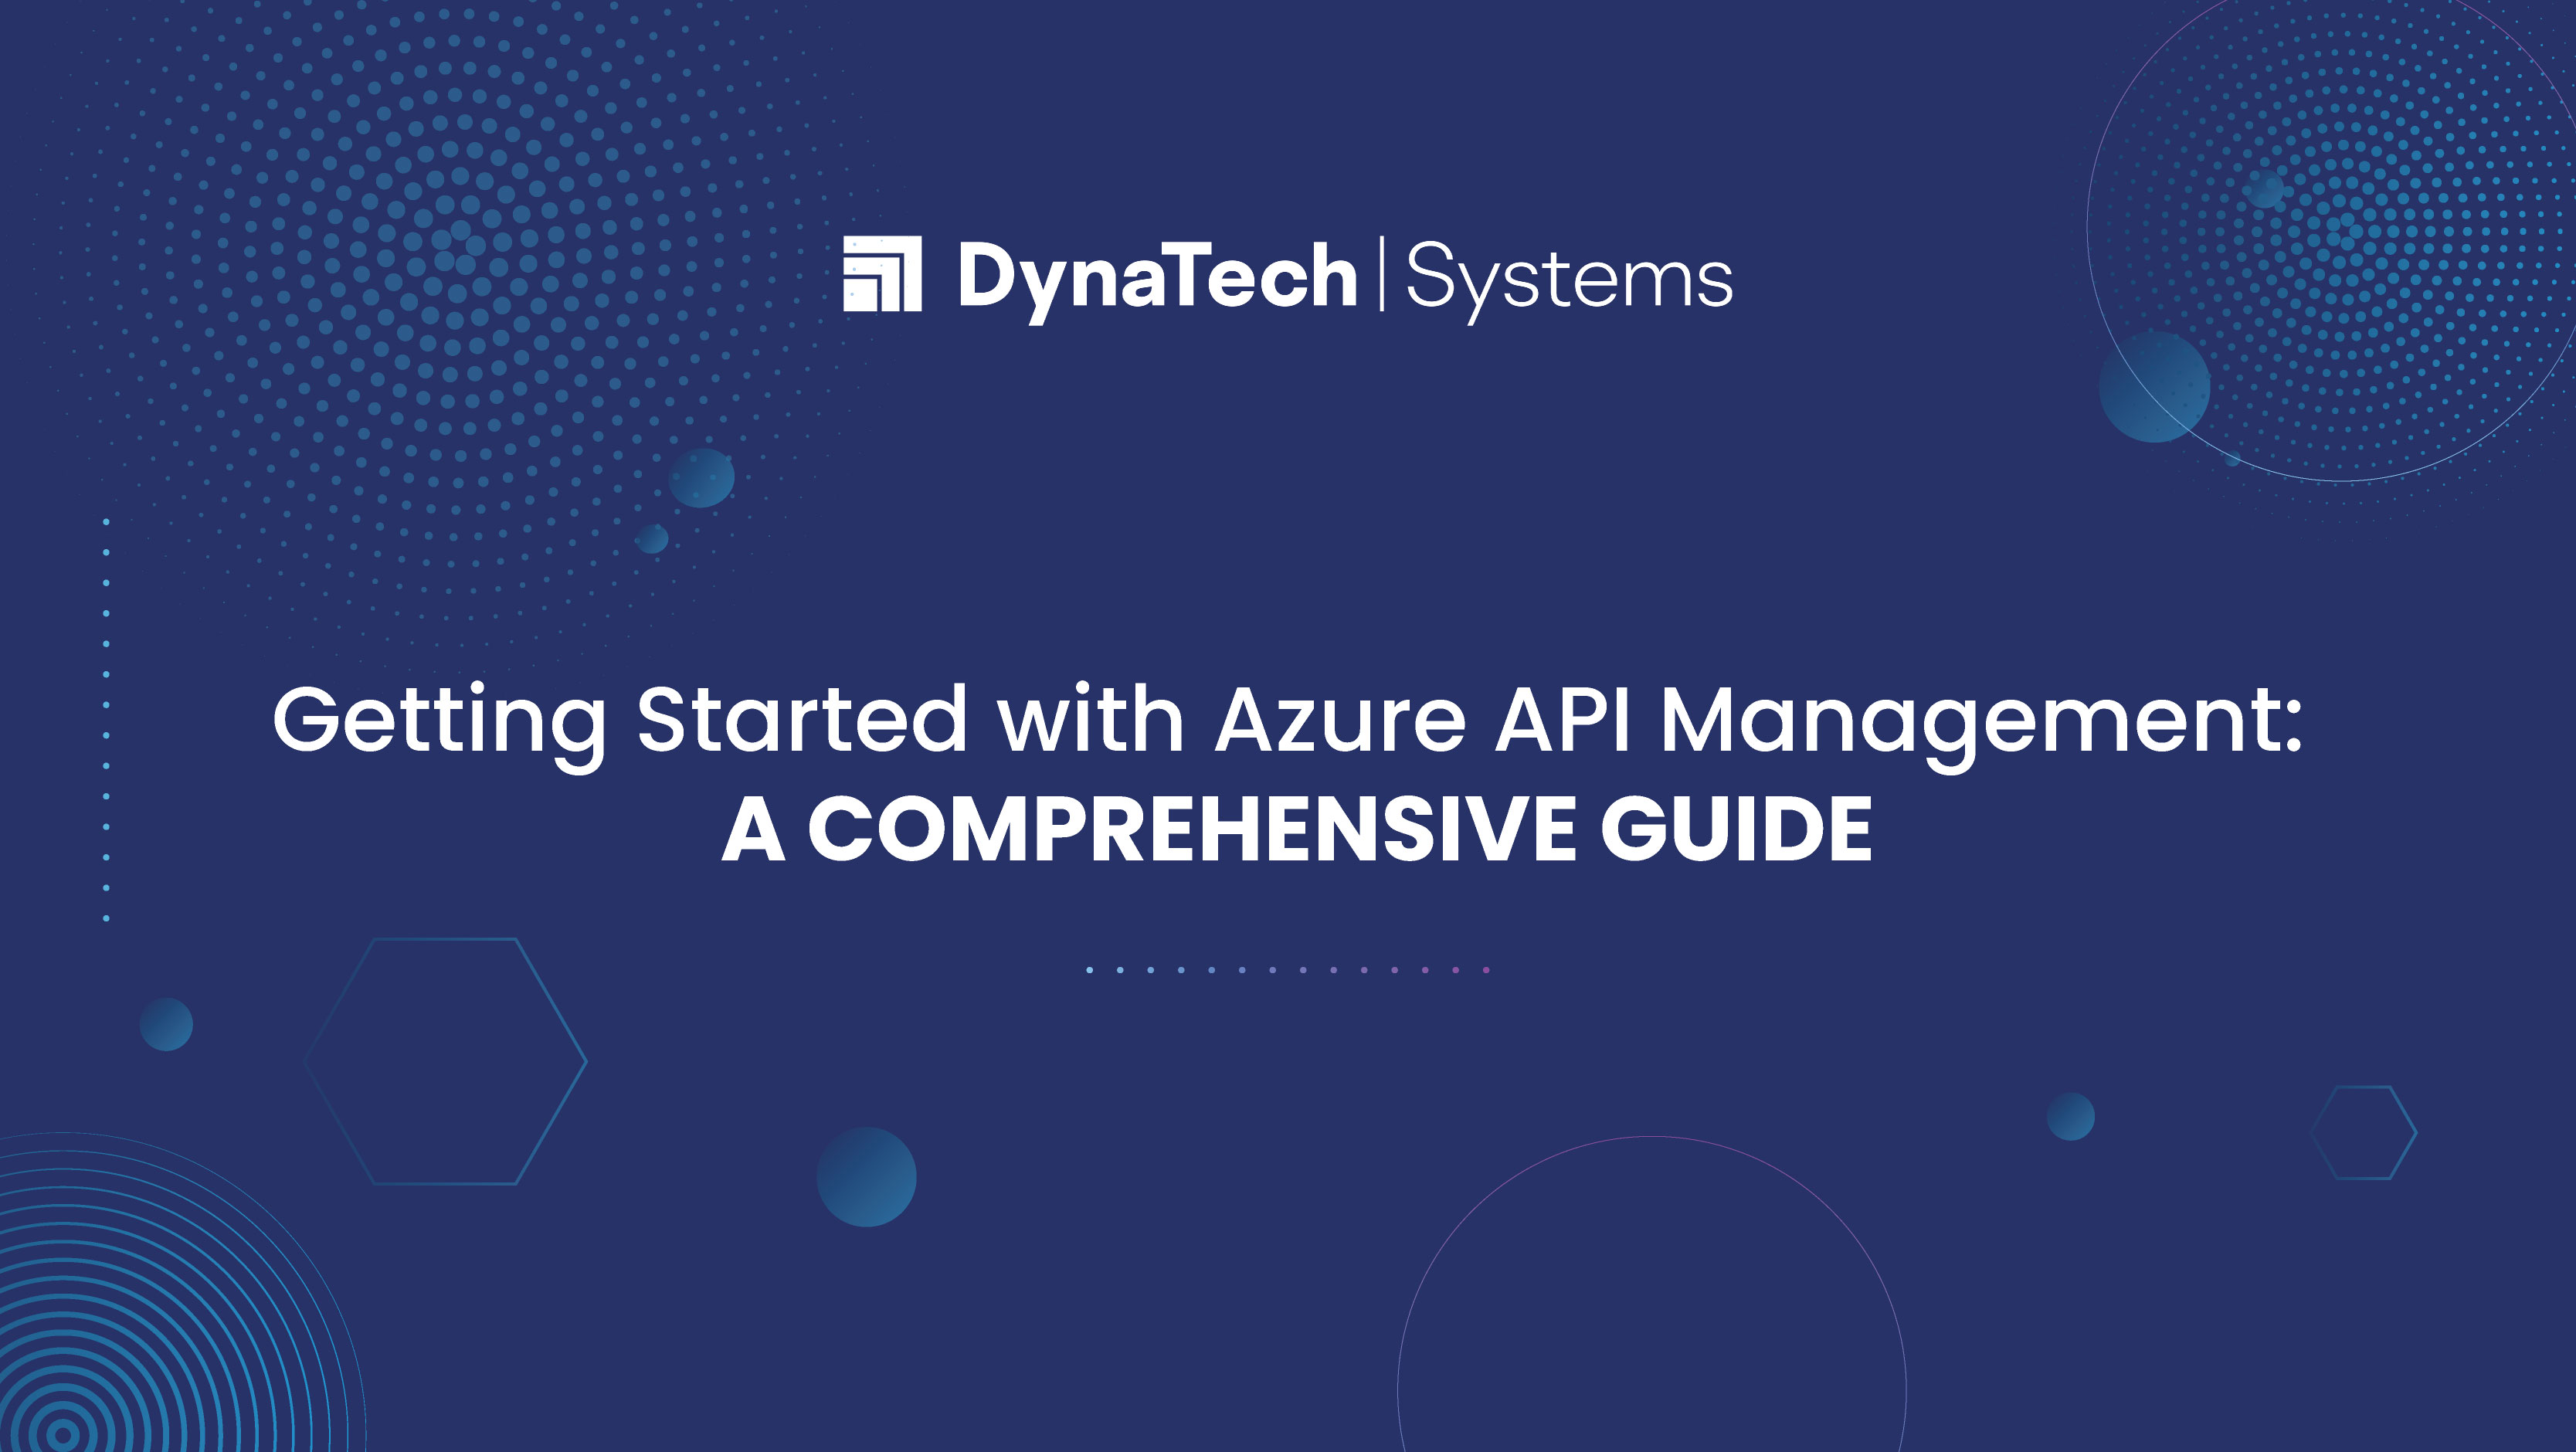 Getting Started with Azure API Management: A Comprehensive Guide